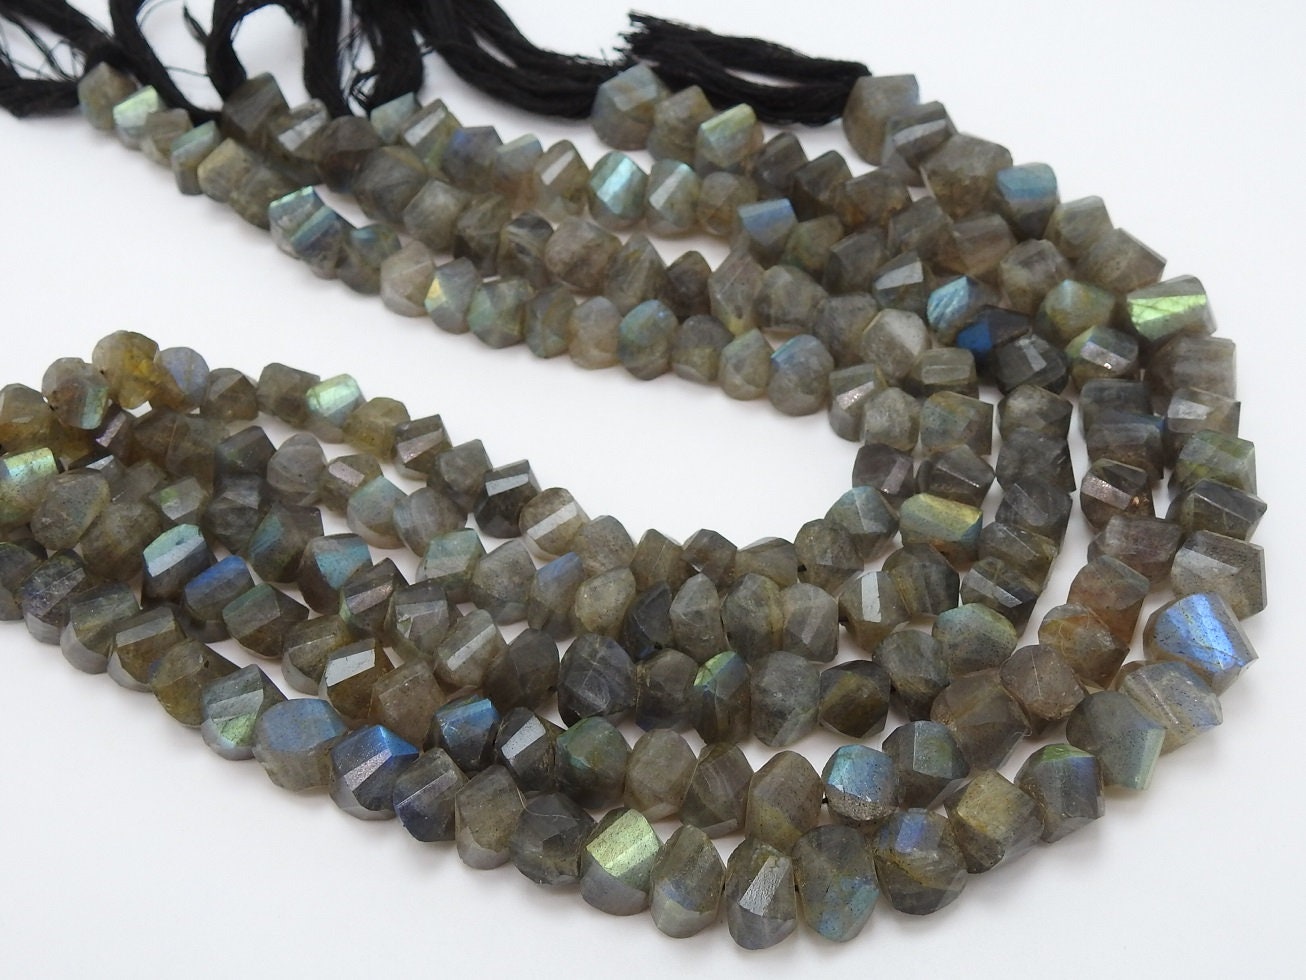 Labradorite Twisted Beads,Faceted,Roundel,Loose Stone,Multi Flashy Fire,10Inchs 10X10To7X7MM Approx,Wholesaler,Supplies,100%Natural B12 | Save 33% - Rajasthan Living 17